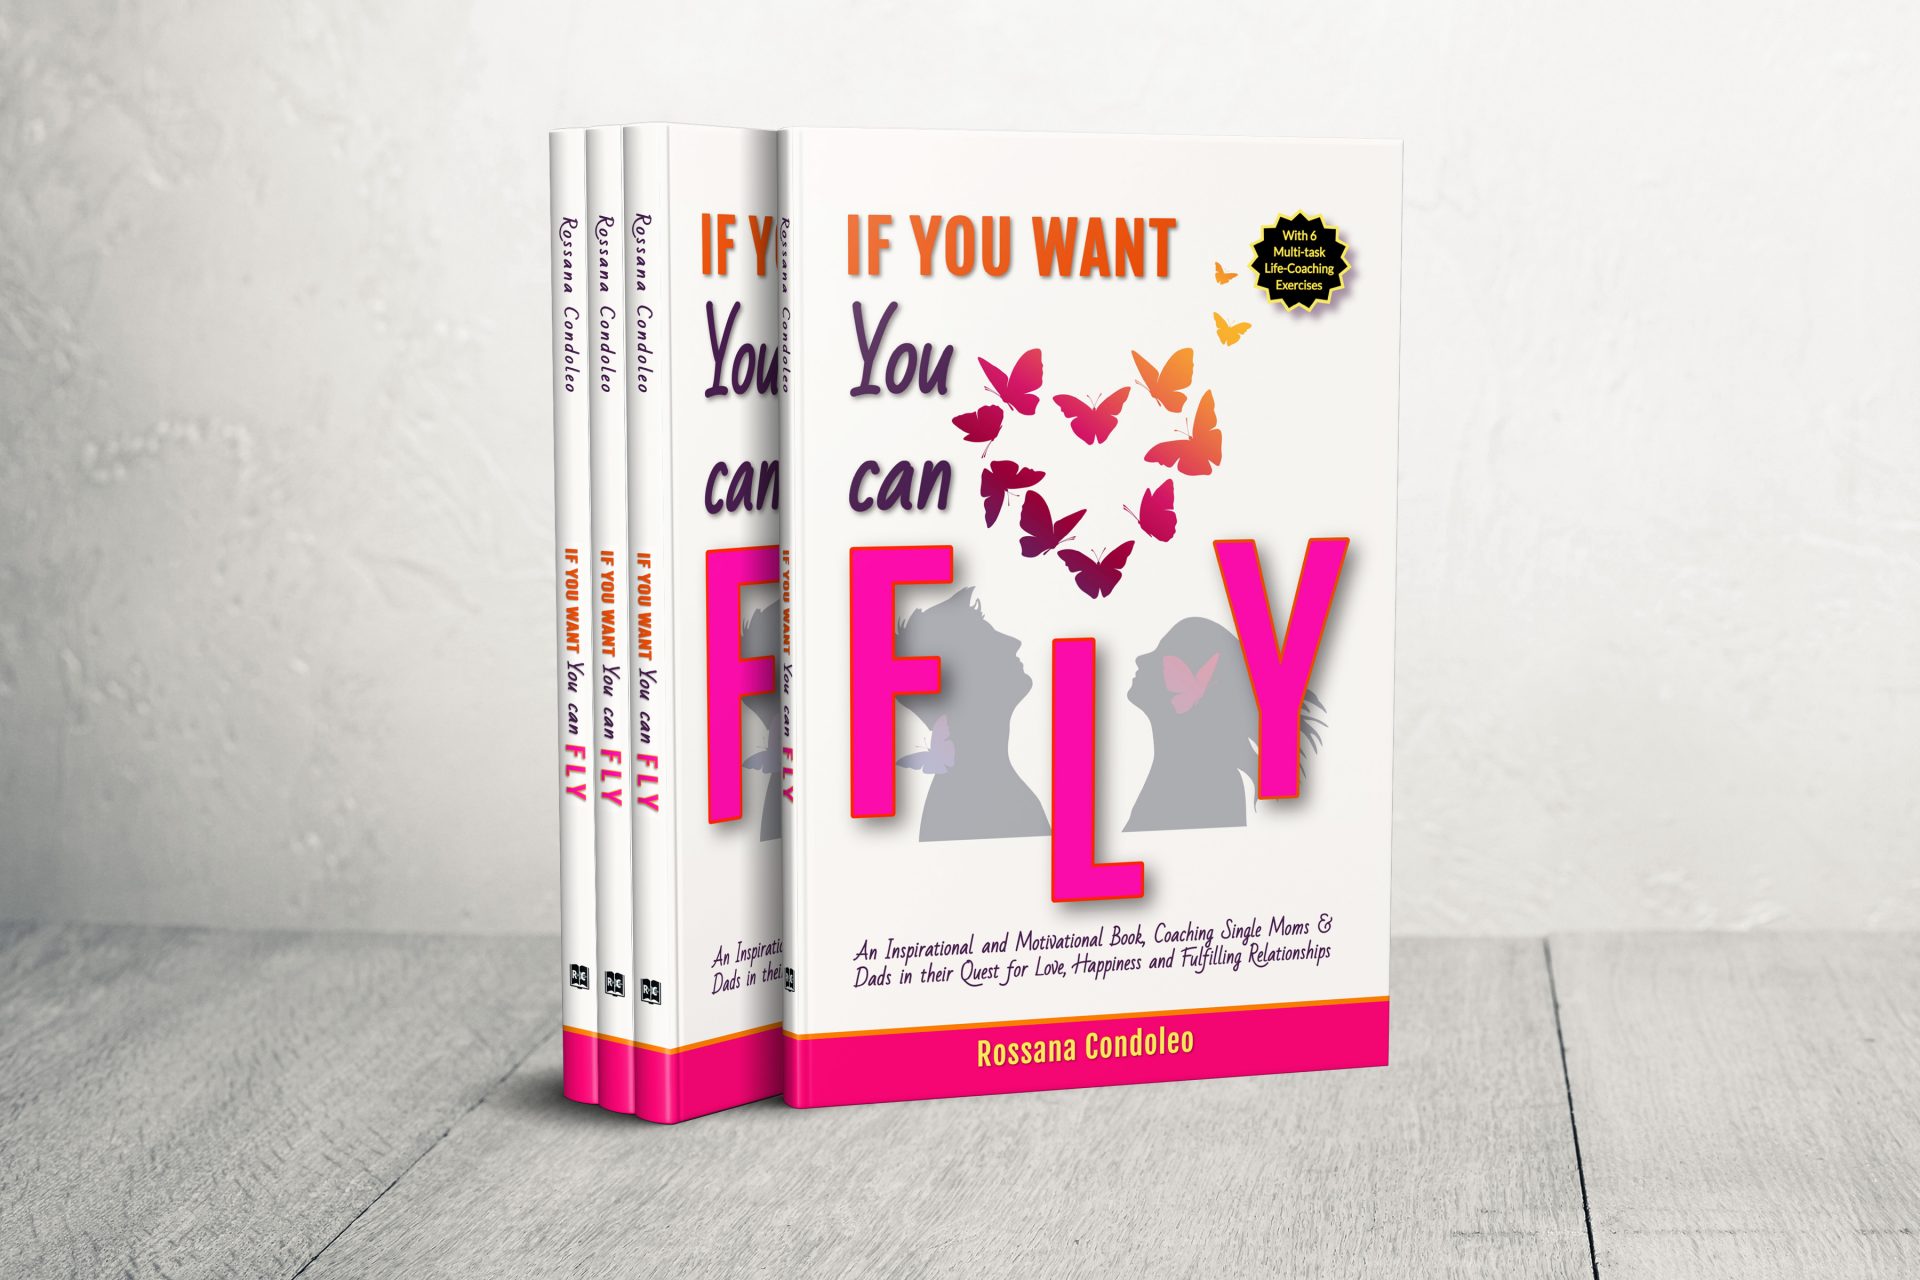 Hardcover of the single parent book If You Want You Can Fly by Rossana Condoleo